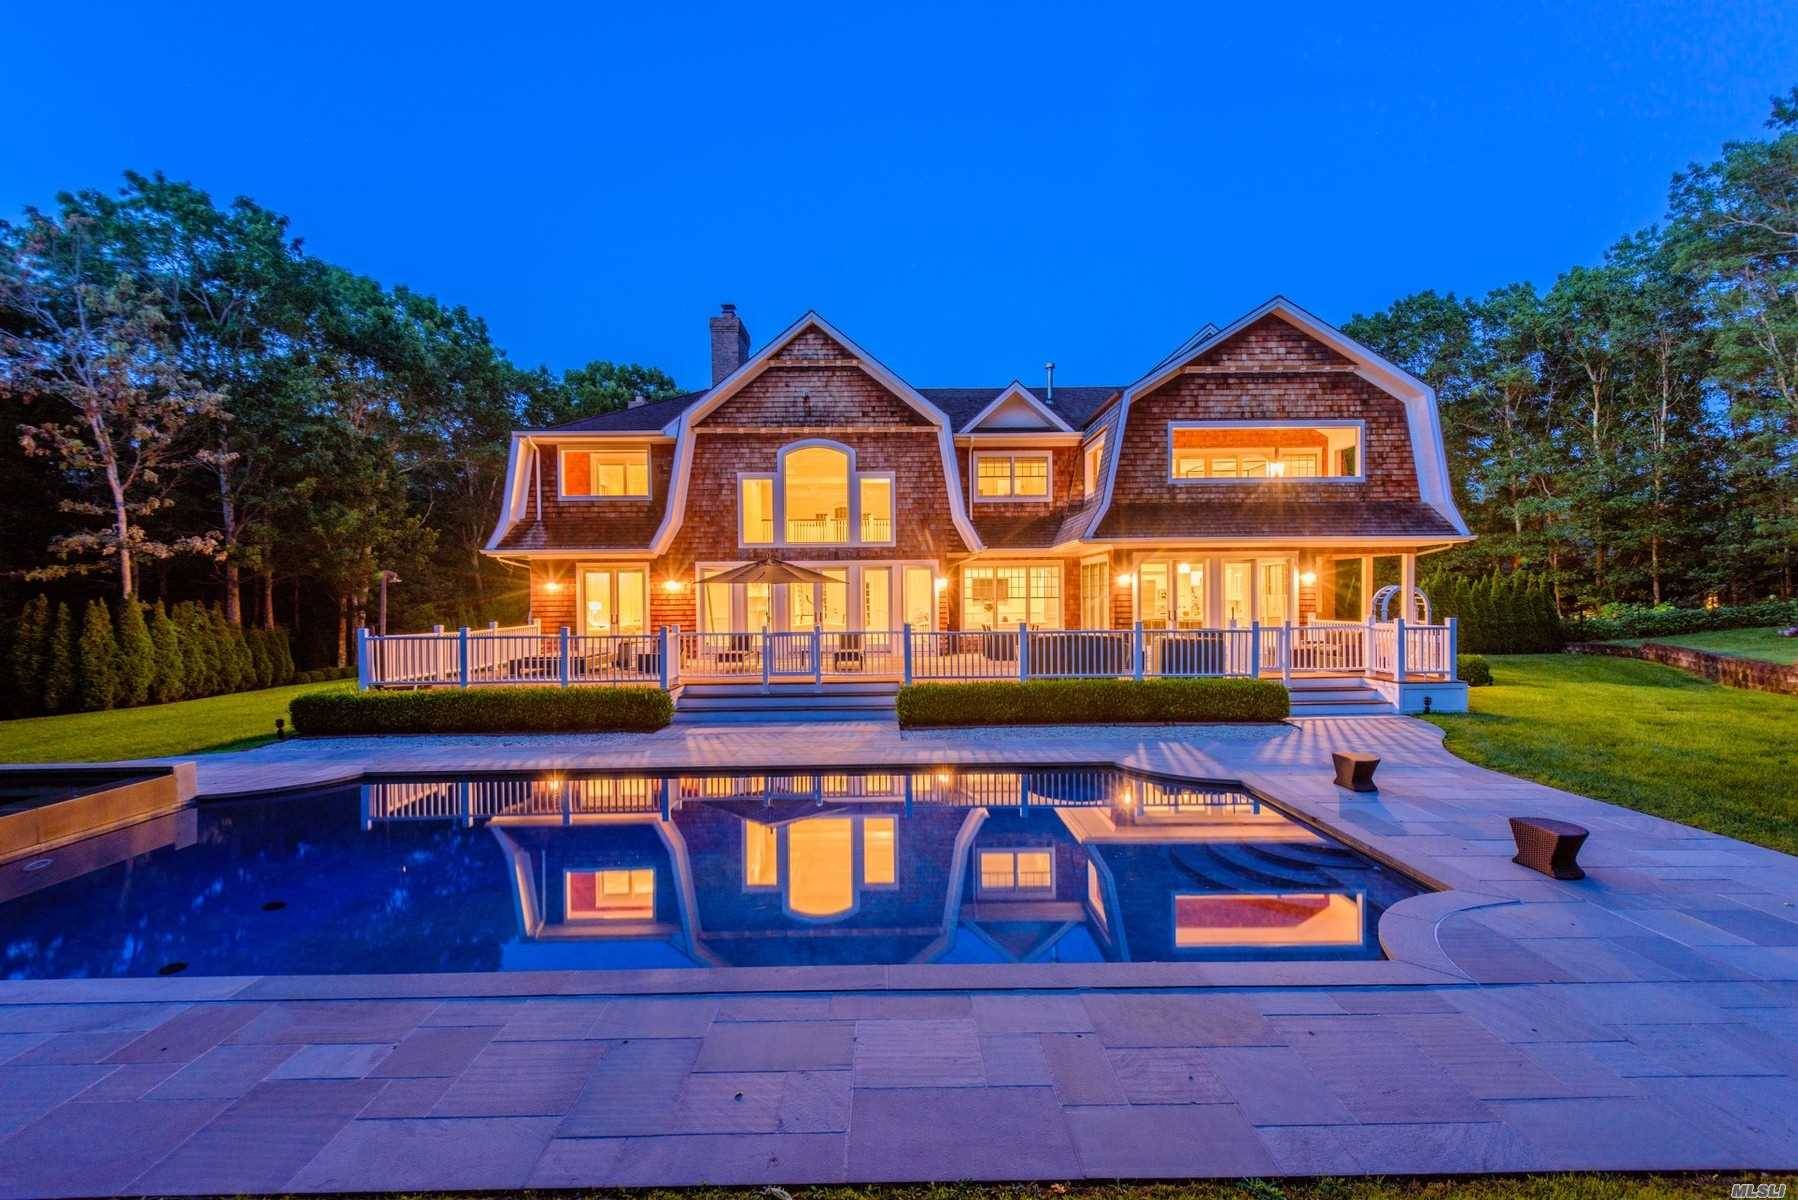 Bordering a 22 acre reserve and located at the end of a cul de sac, this gated Southampton estate is sited on 2.